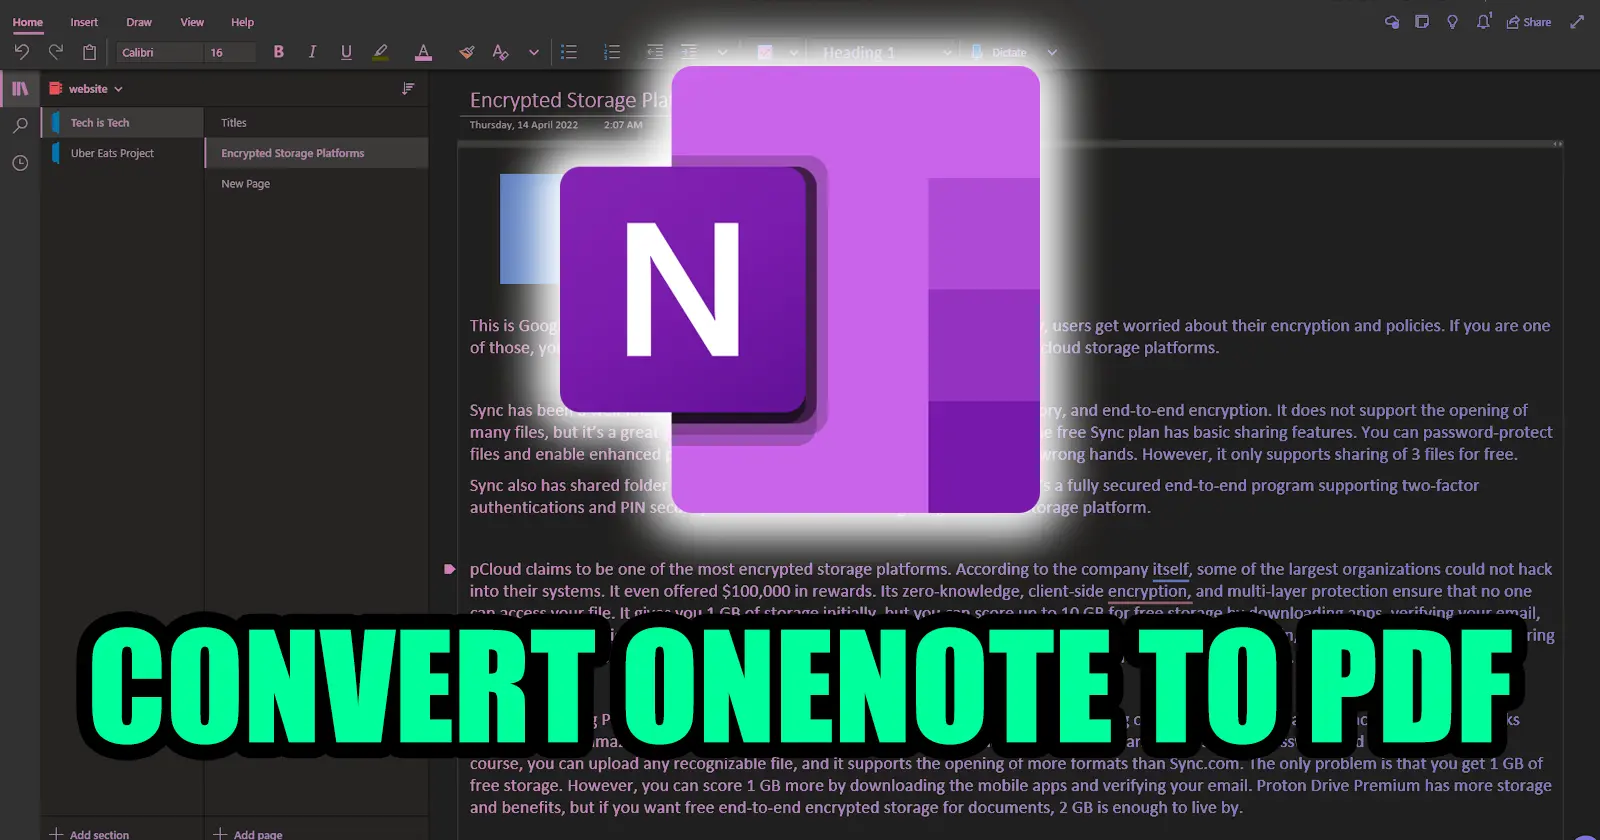 How to Convert OneNote to PDF